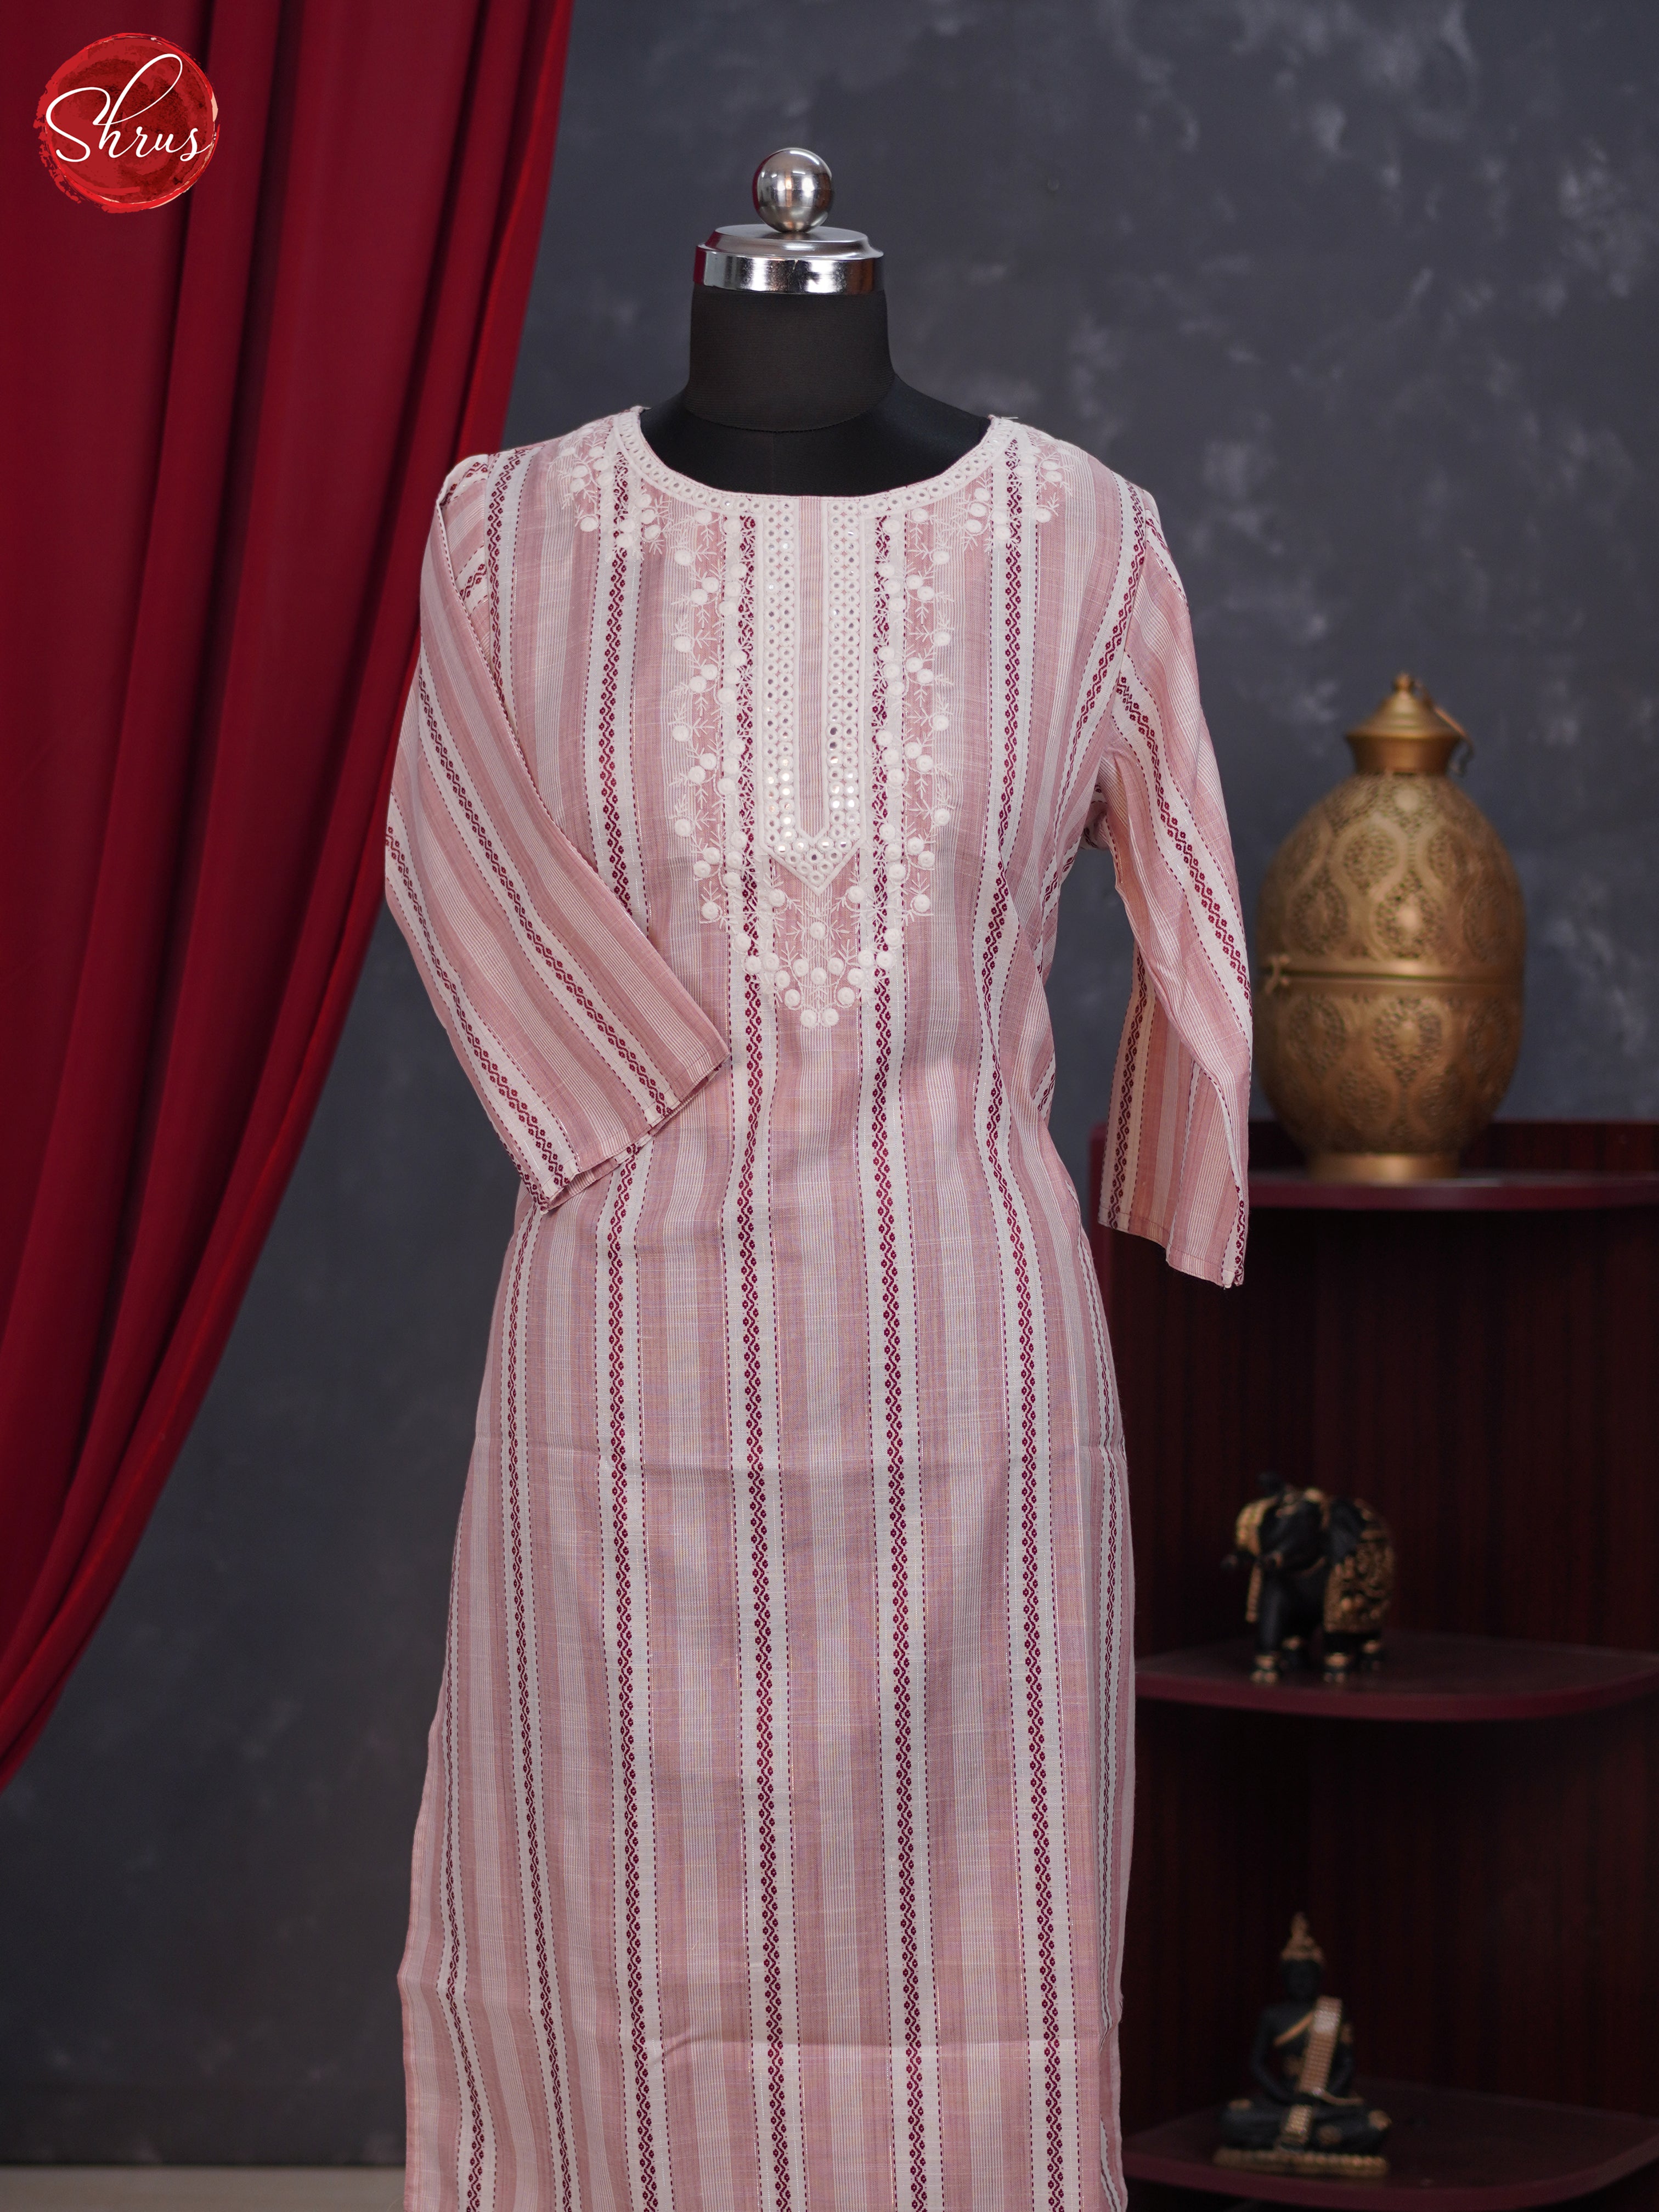 Pink- Printed Readymade Straight fit kurti with embroidery in neck Yoke - Shop on ShrusEternity.com